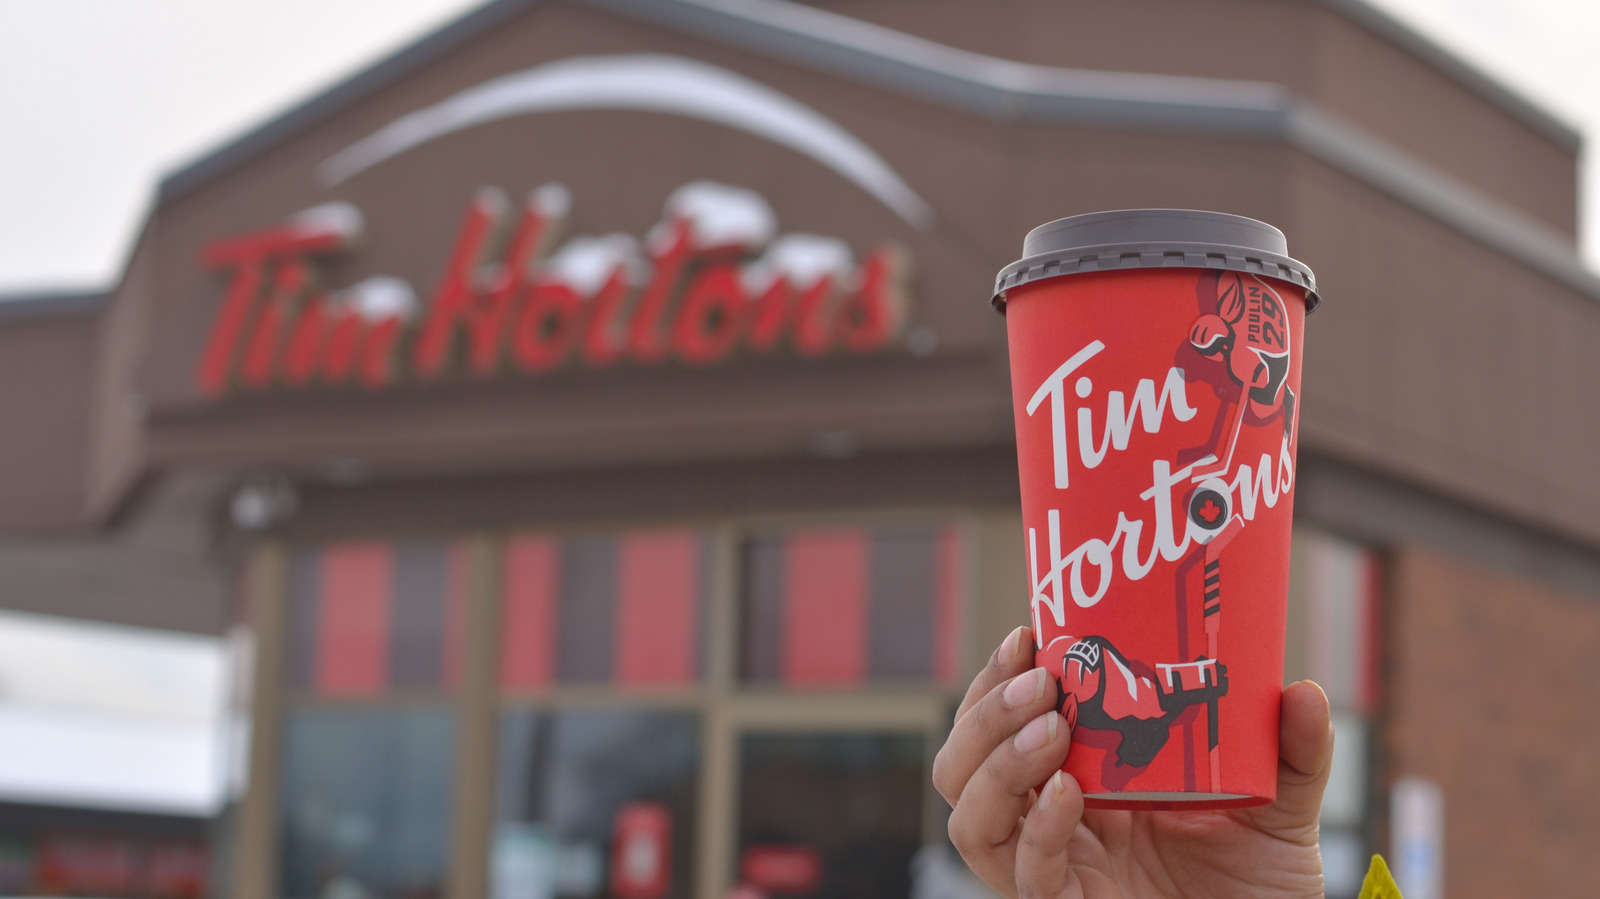 The Strange Conspiracy Behind Tim Hortons Coffee